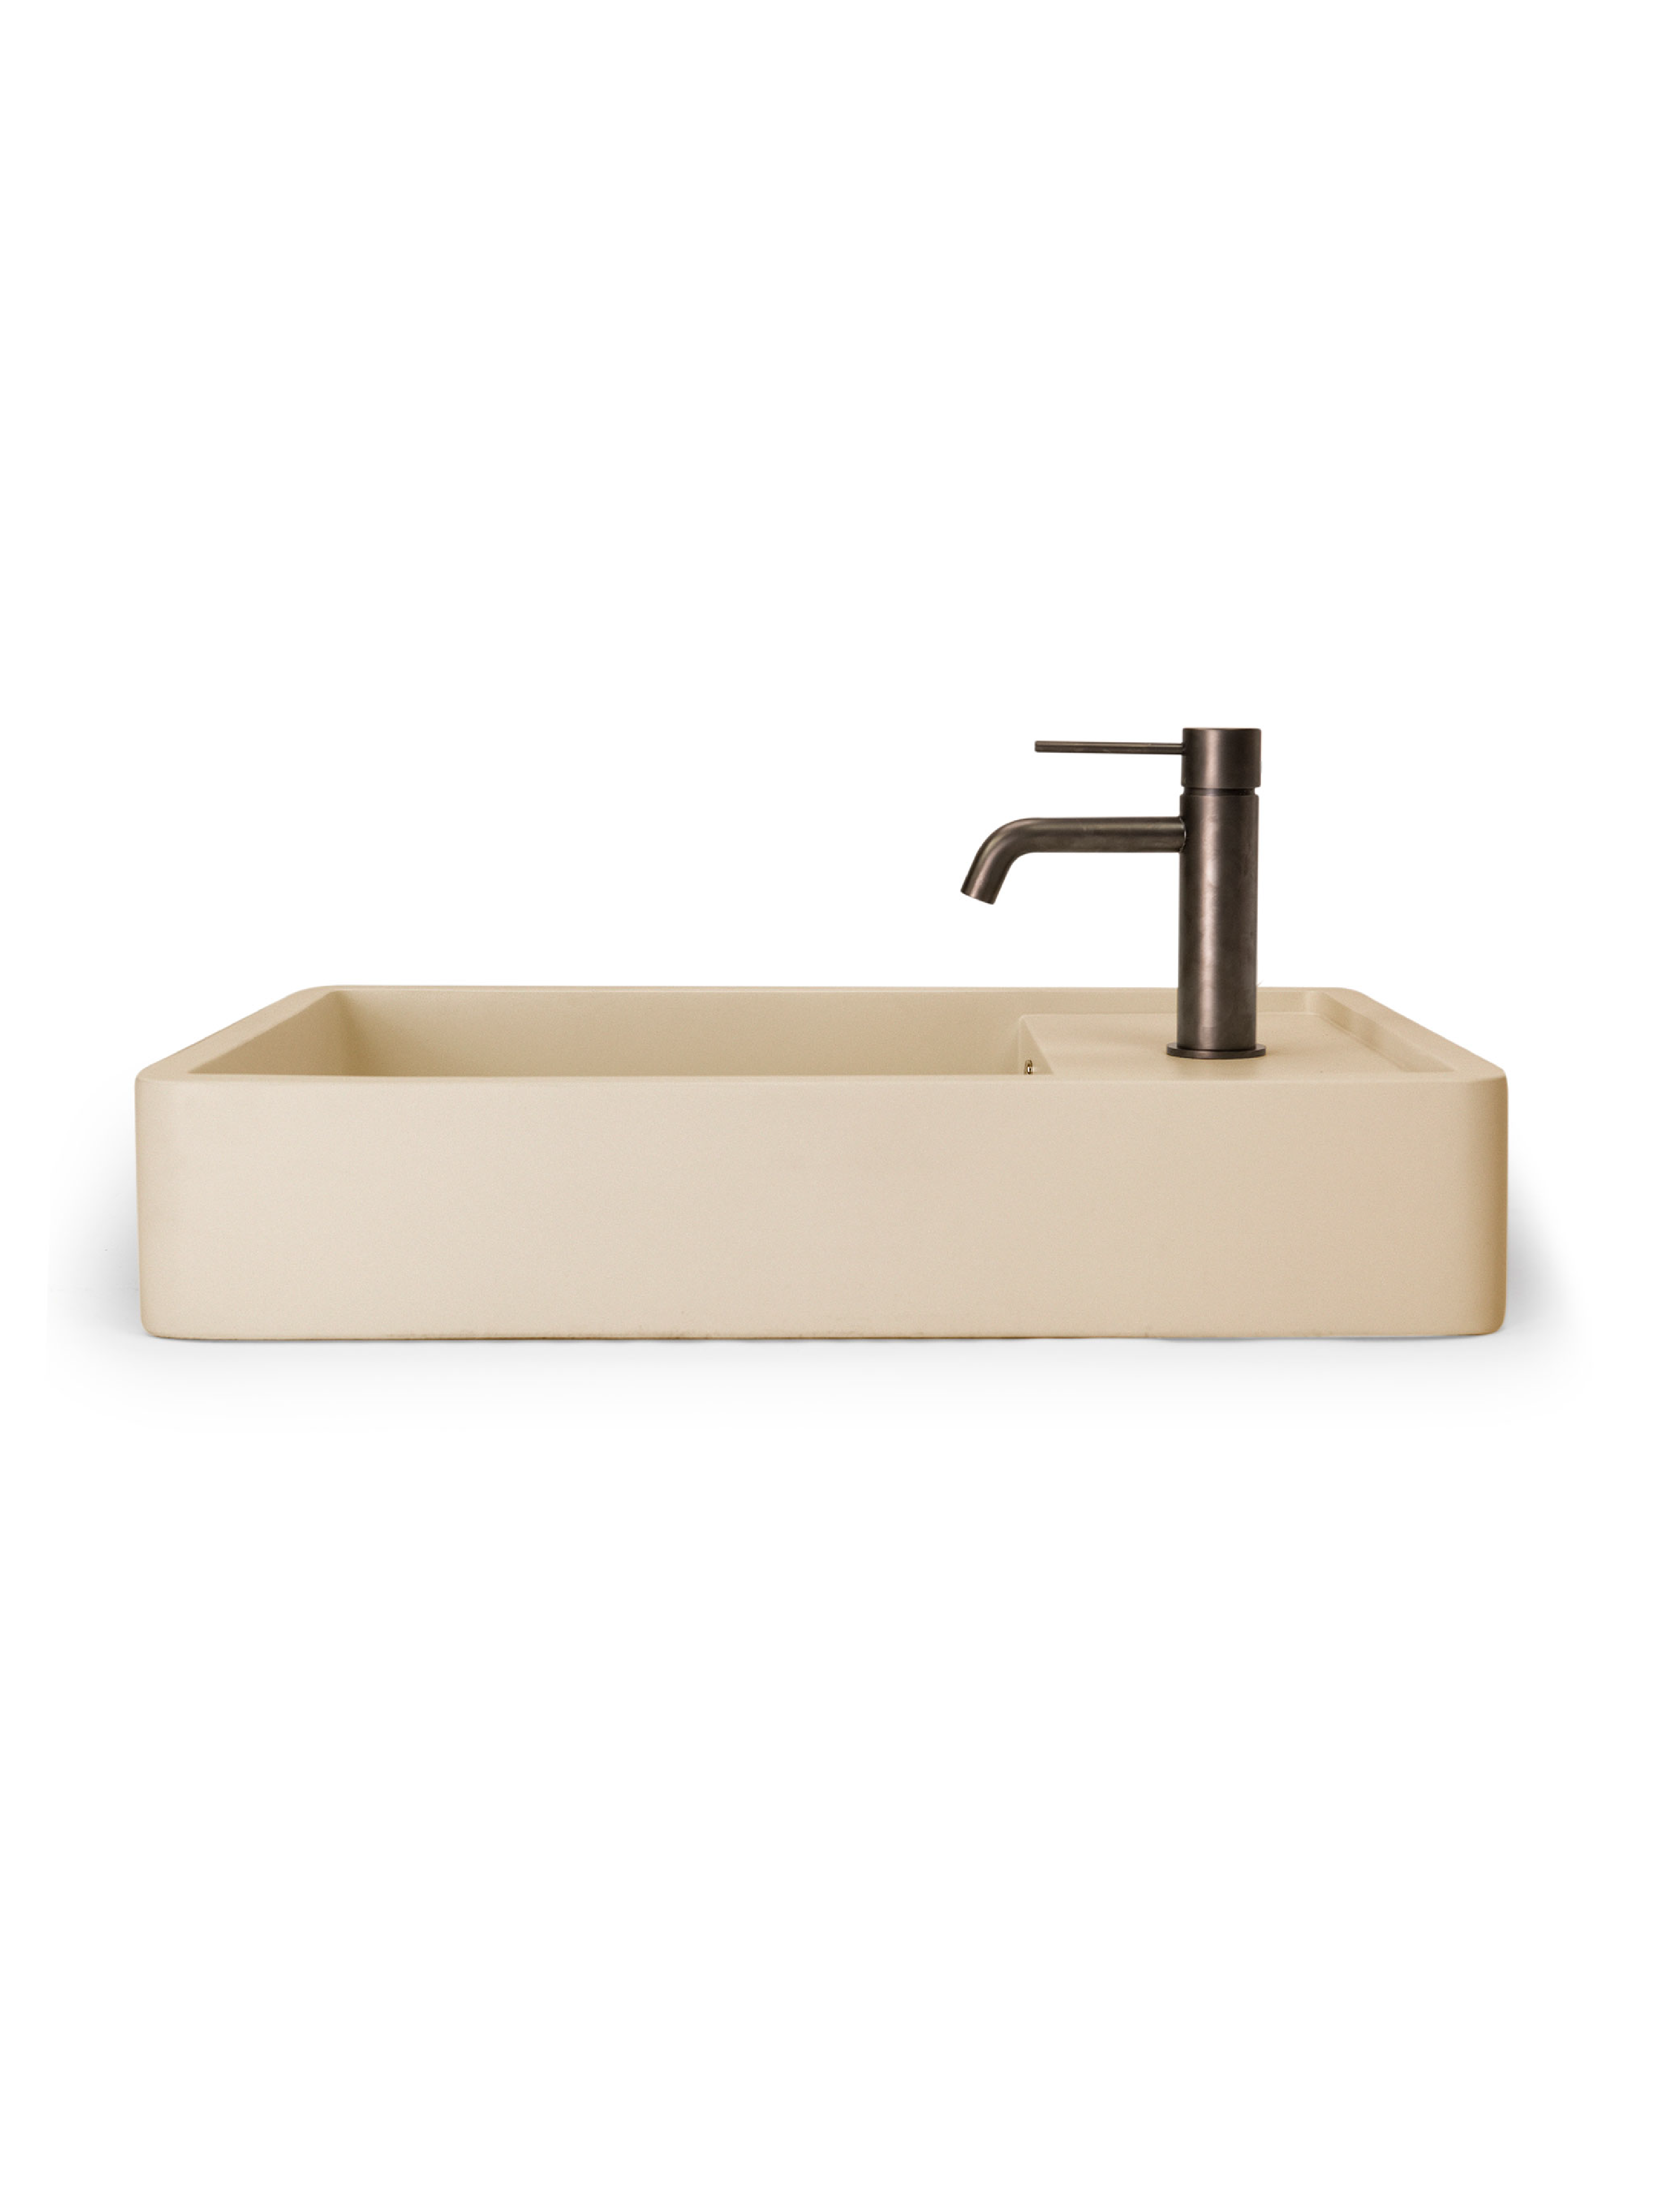 Shelf 03 Concrete Countertop basin w/ Tap Hole & Overflow Kit (Price Upon Request)